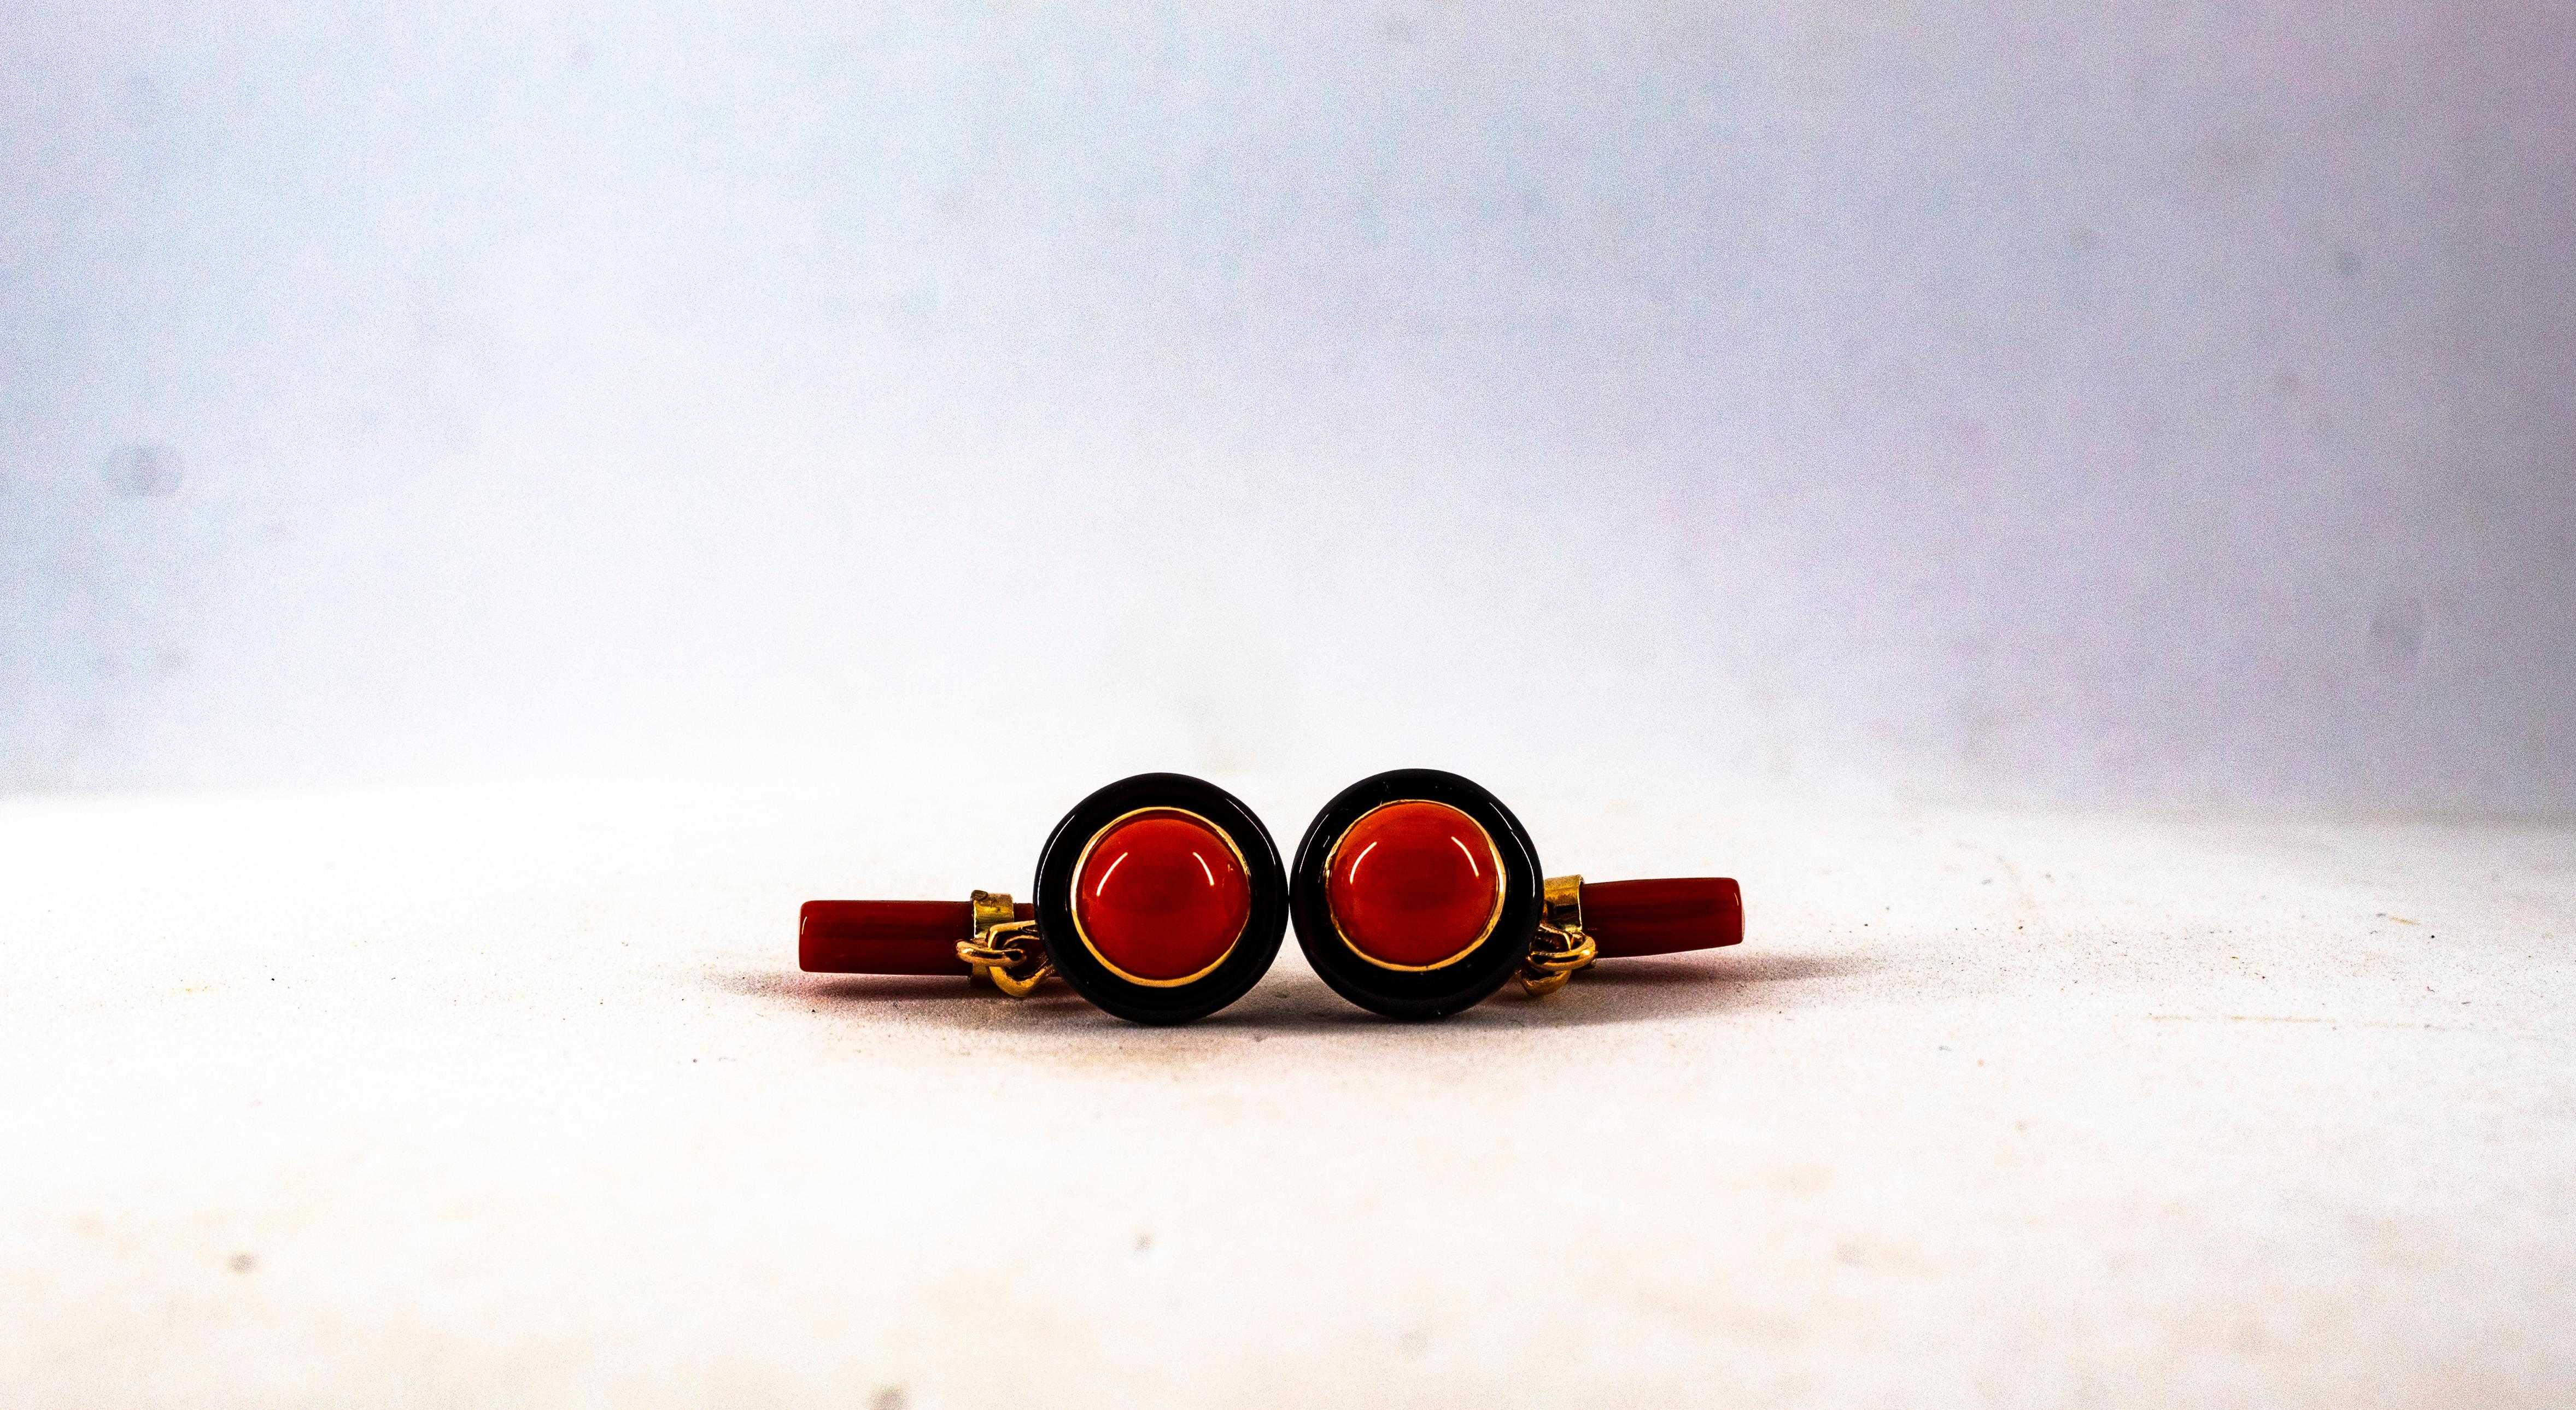 For any problems related to some materials contained in the items that do not allow shipping, please contact the seller with a private message to solve the problem.
We can ship every piece of our 1stdibs catalog worldwide.

These Cufflinks are made